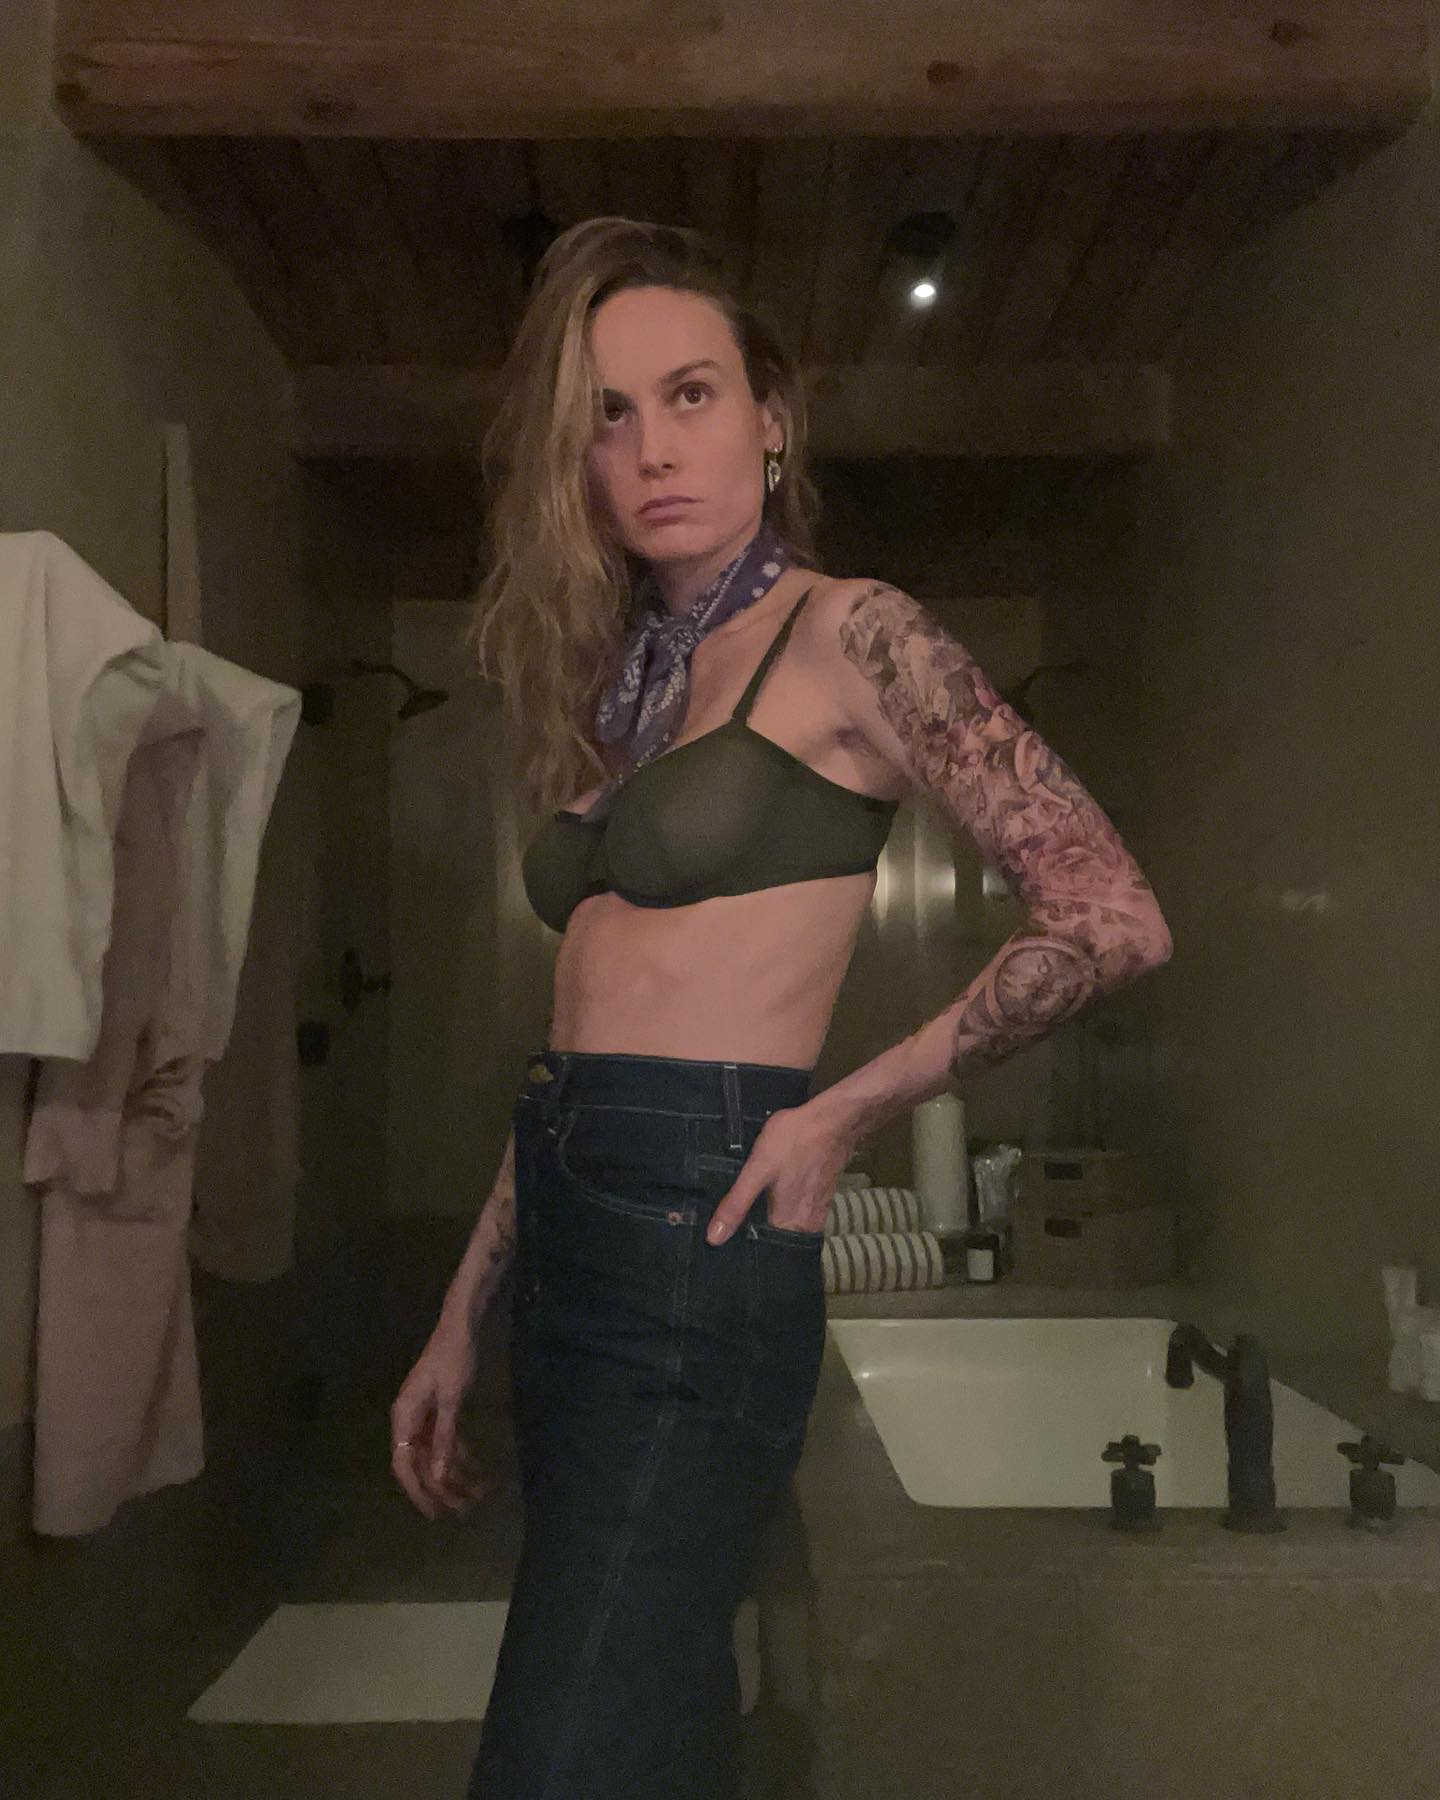 Brie Larson Shows Off Her Tattoos in a Bra!